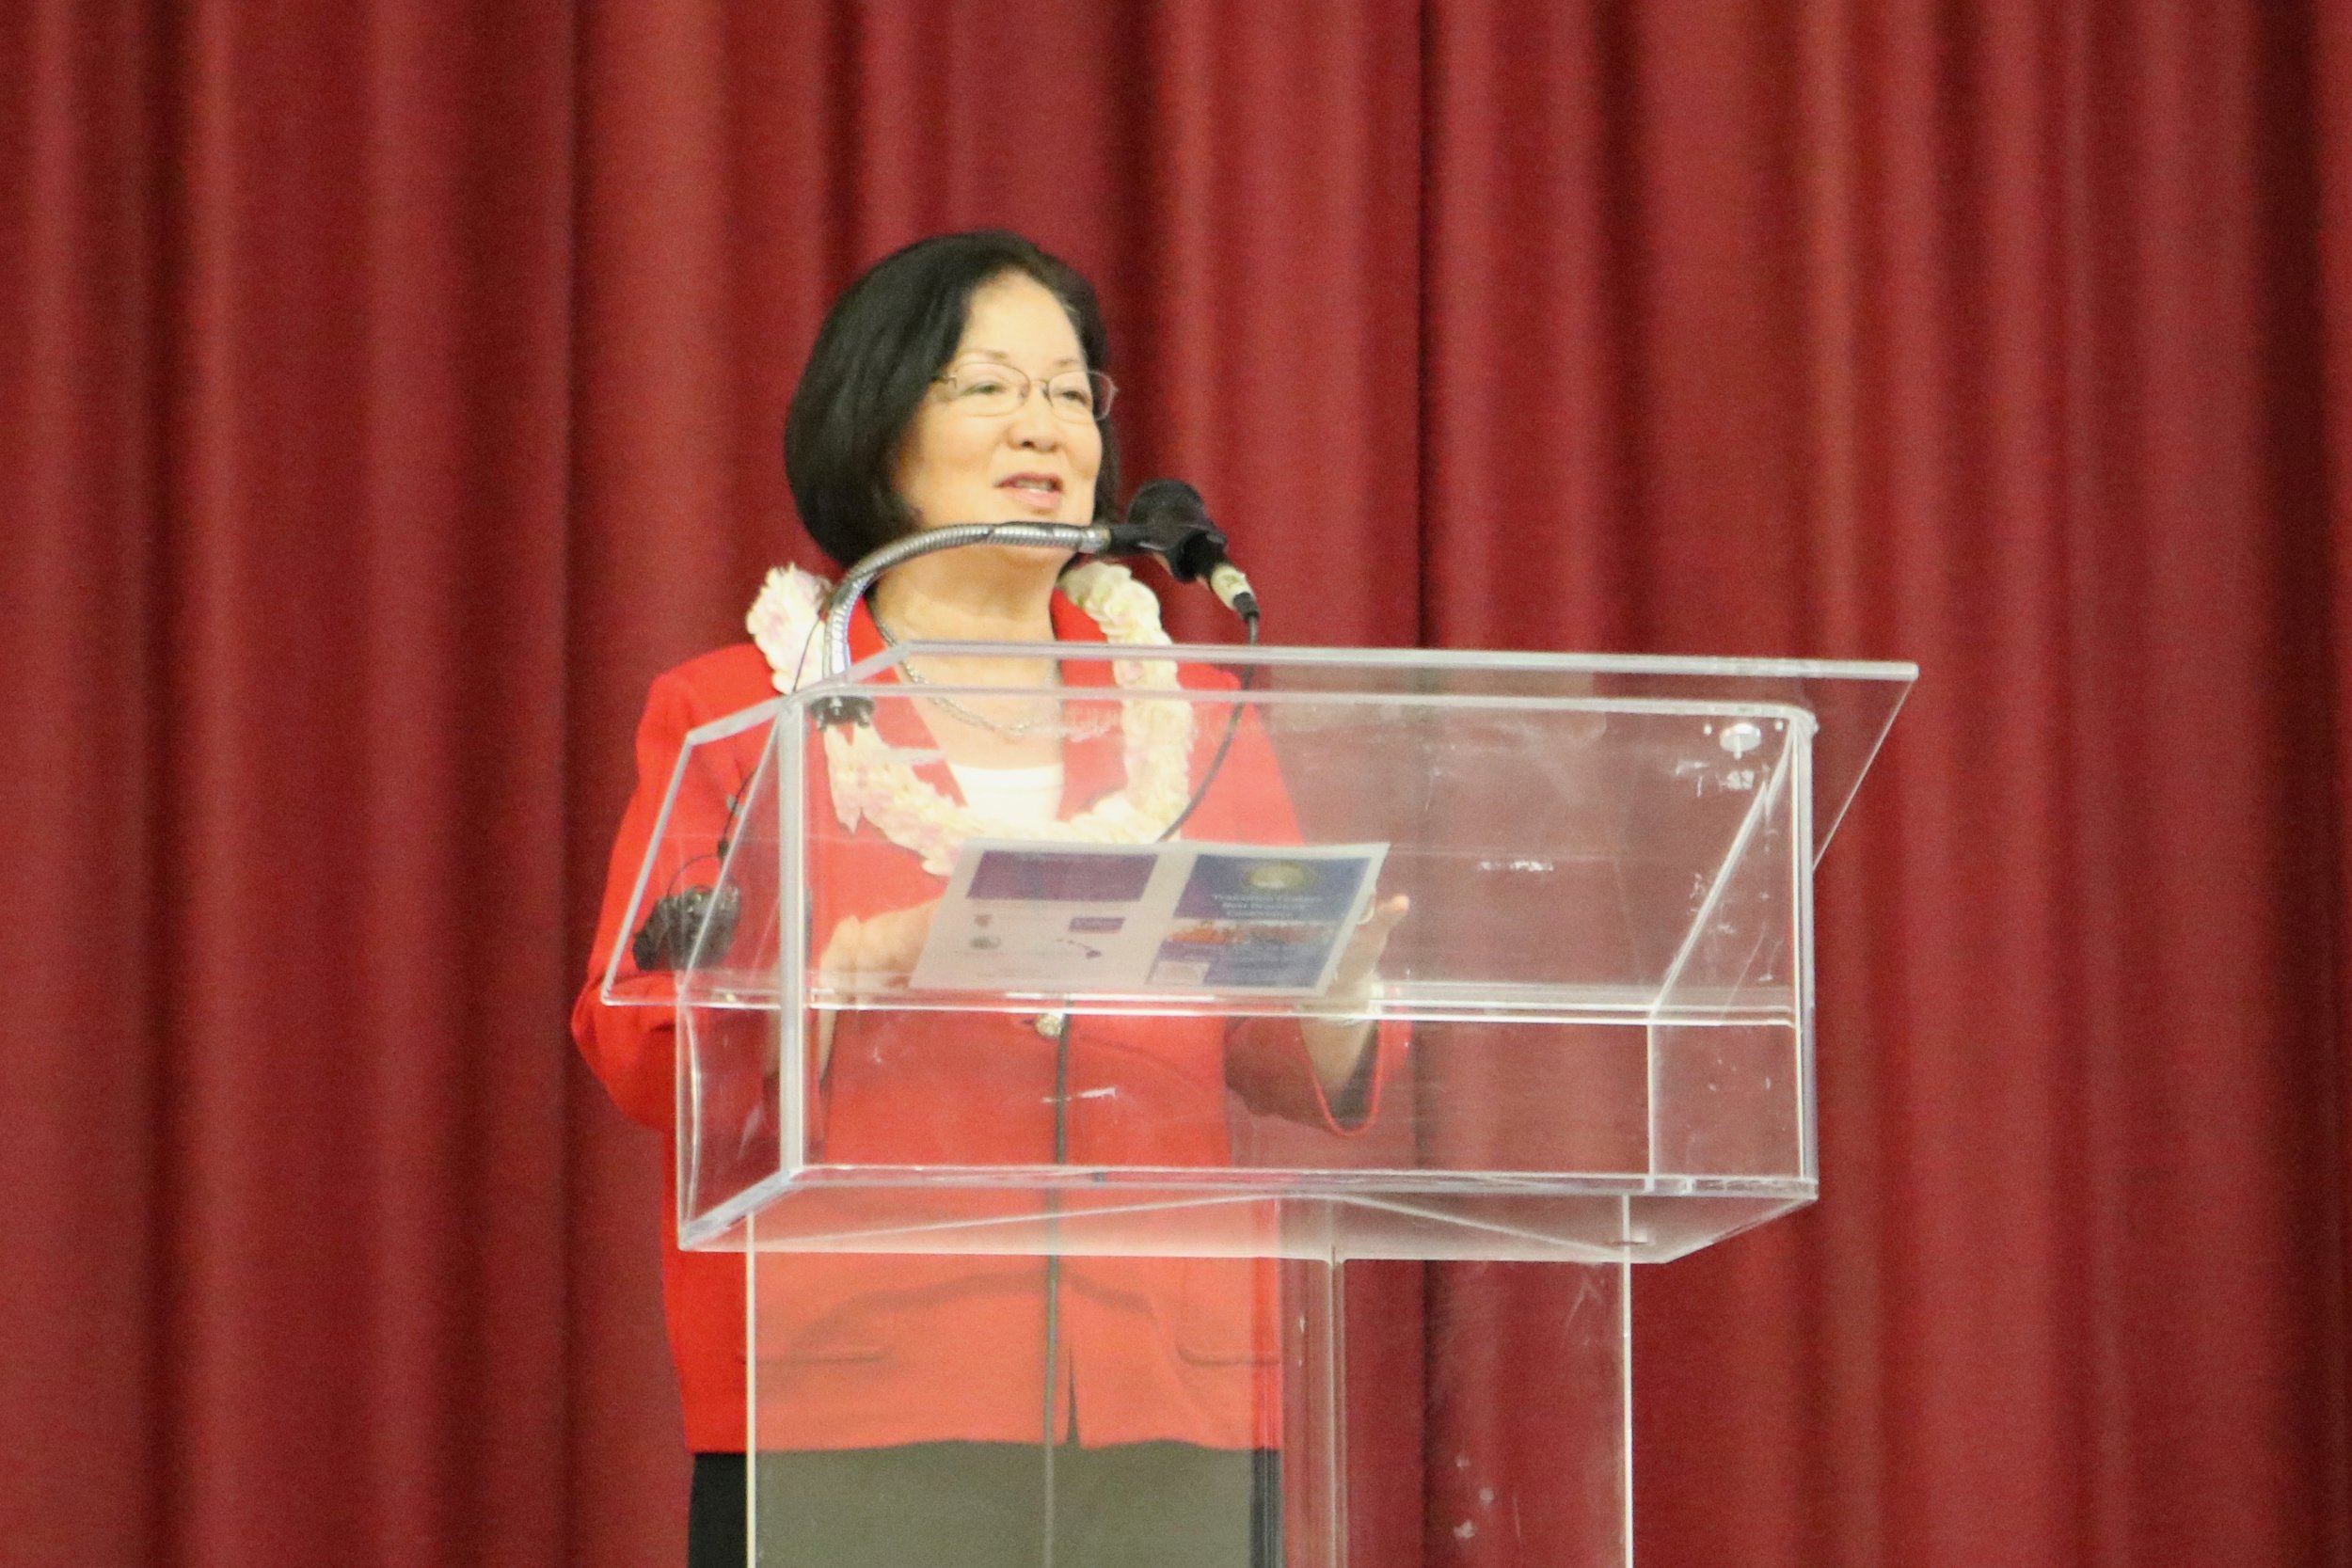 The conference kicked off with opening remarks from United States Senator Mazie Hirono. (Copy)